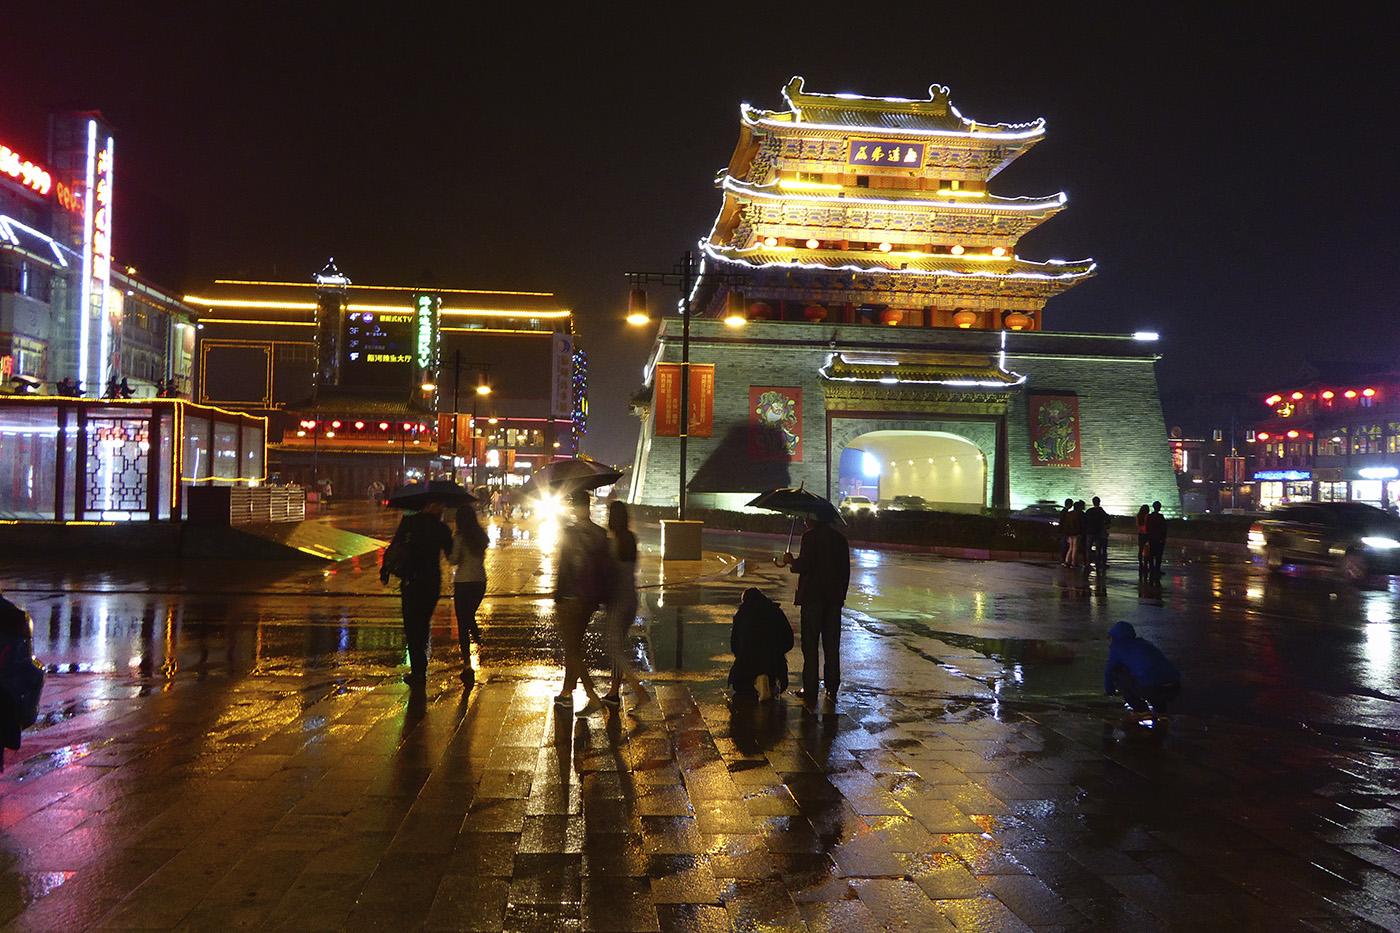 Night time near the Drum Tower in Kaifeng. Photo: Mick Duffield